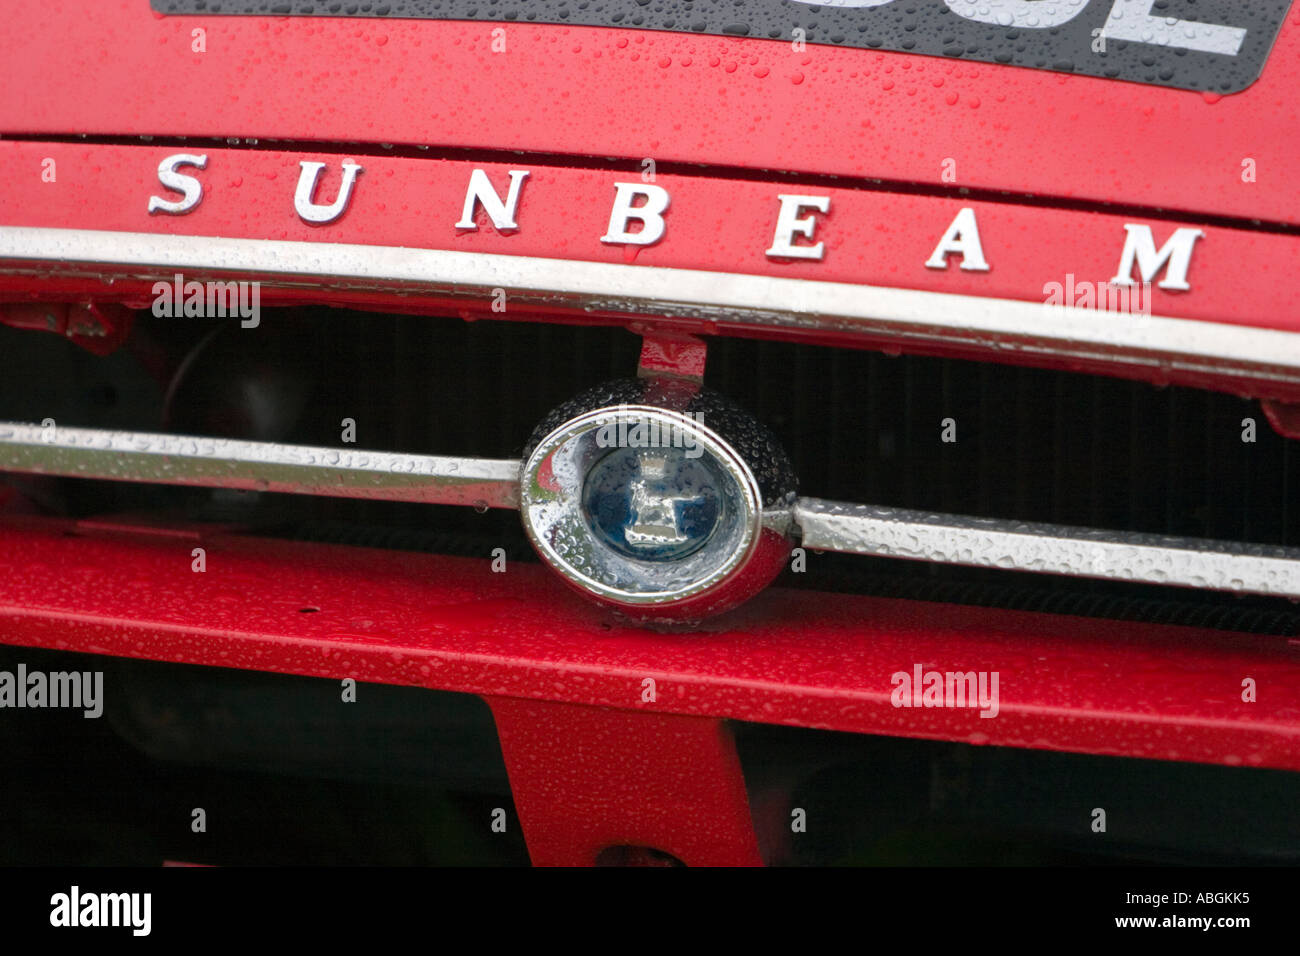 Front grille detail red 1967 Sunbeam Alpine classic car Stock Photo